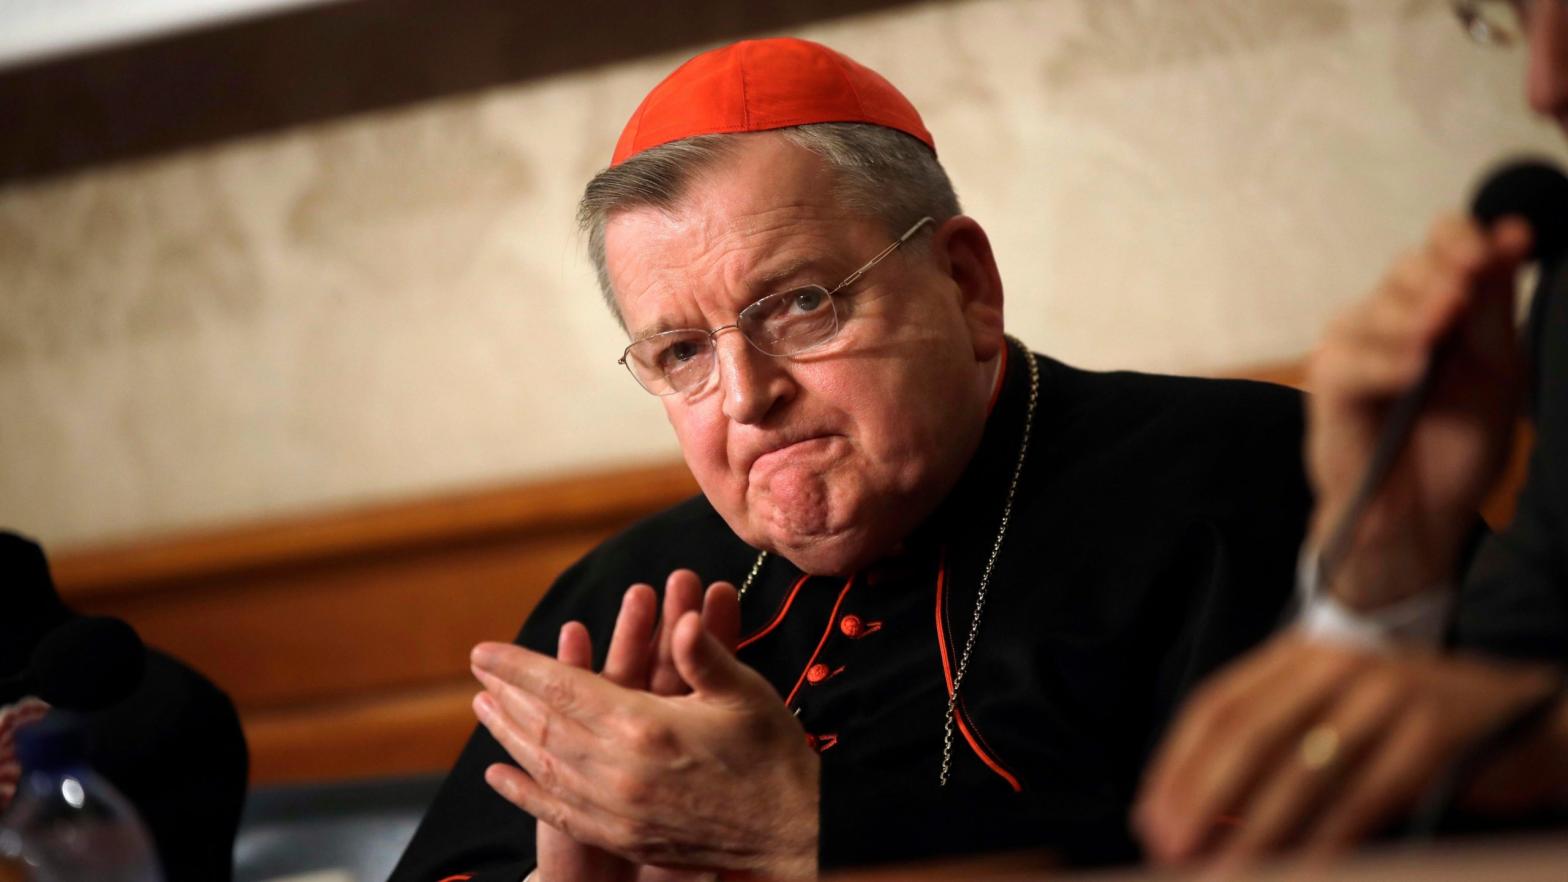 In this Sept. 6, 2018 file photo, Cardinal Raymond Burke  applauds during a press conference at the Italian Senate in Rome. (Photo: Alessandra Tarantino, AP)